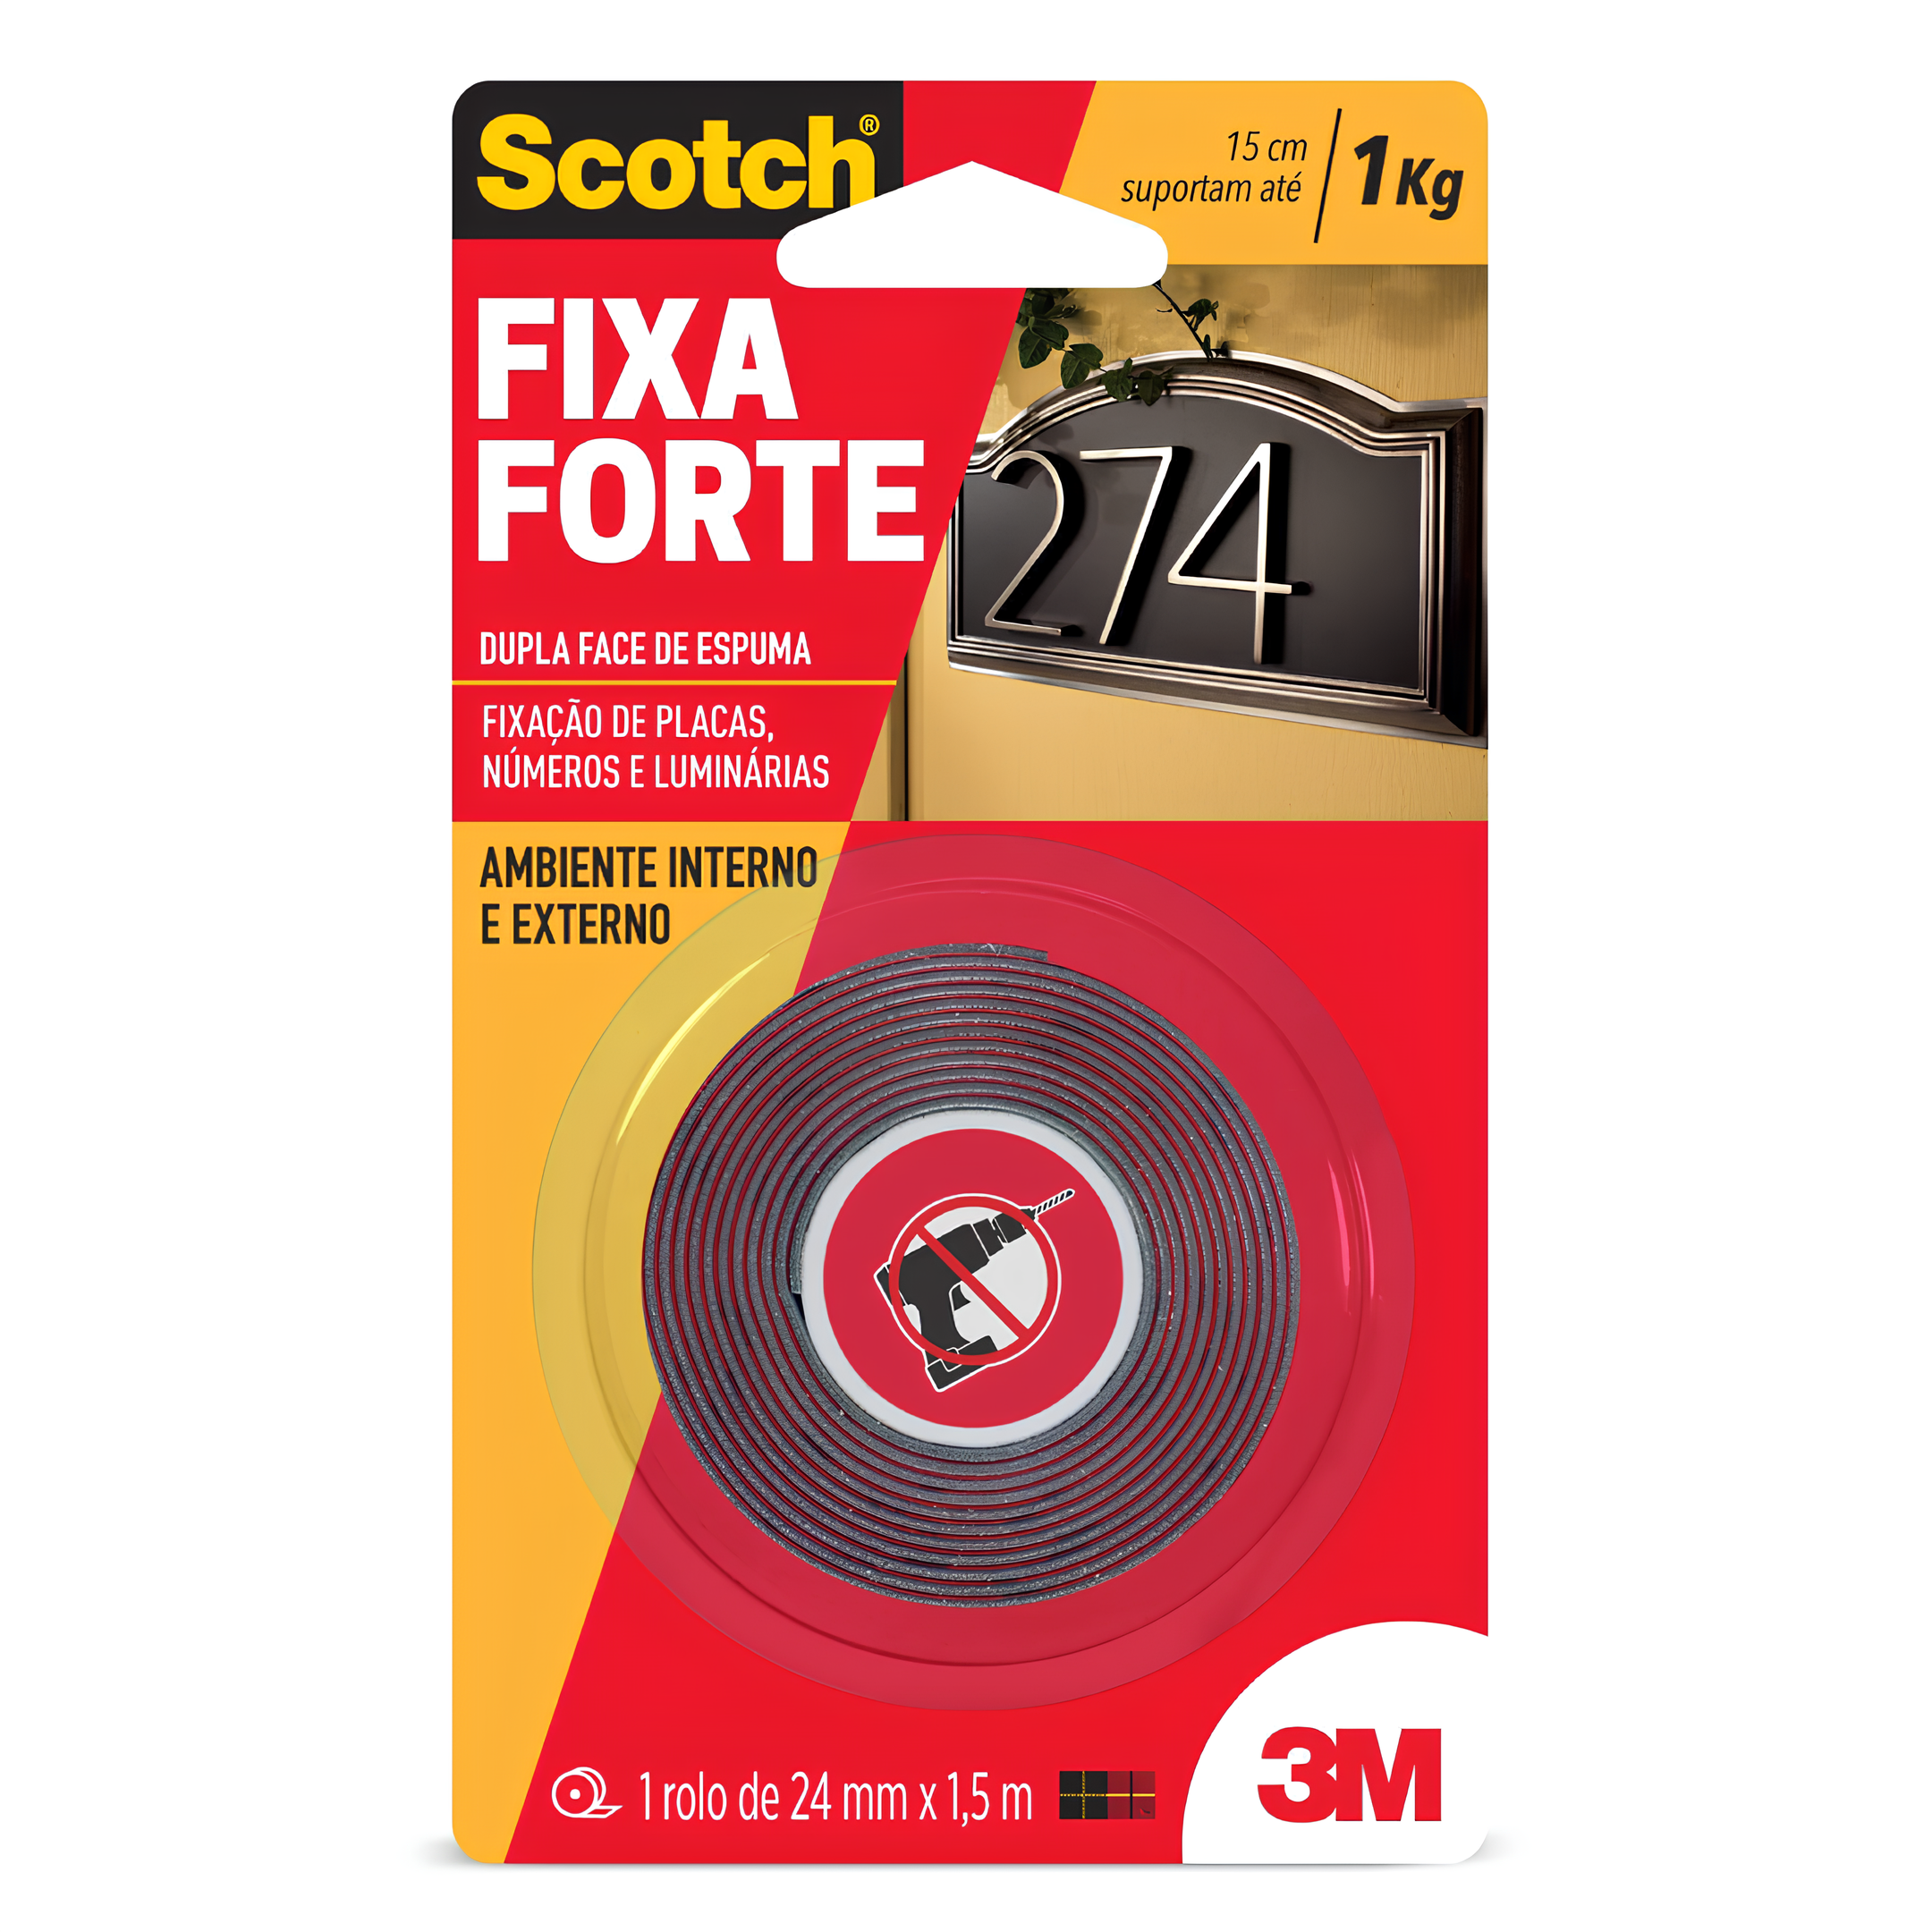 Fita Dupla Face Fixa Forte Extreme 24Mm X 1,5M 3M